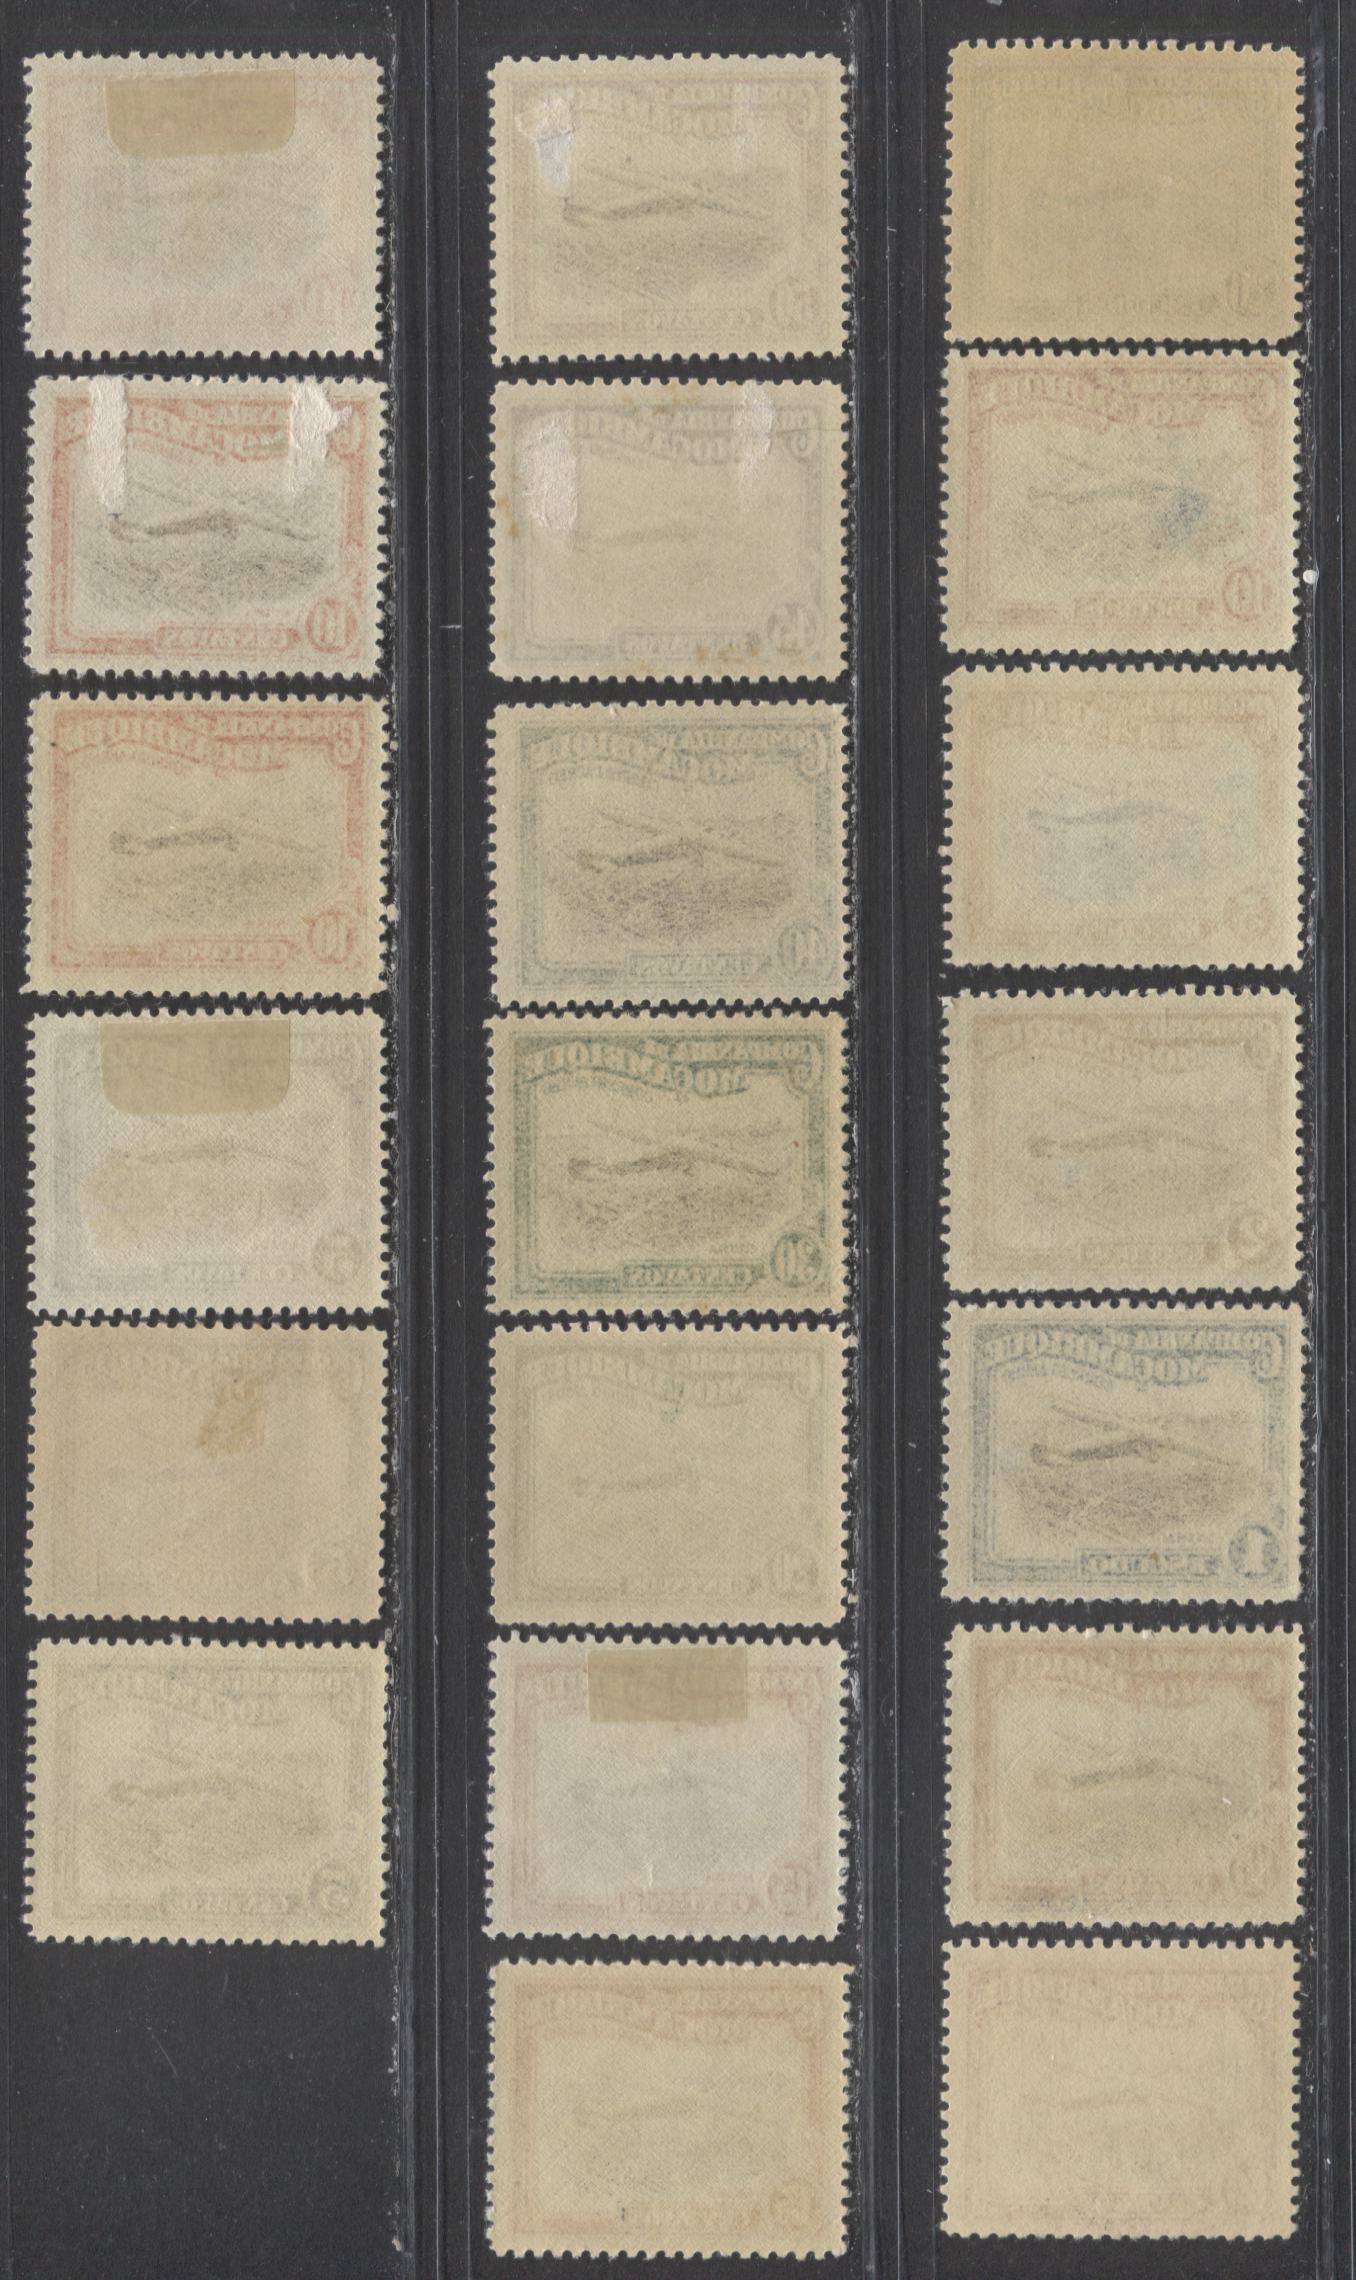 Lot 234 Mozambique Company SC#C1-C15 1935 Pictorial Definitives, A F/VFOG & NH Range Of Singles, 2017 Scott Cat. $12.8 USD, Click on Listing to See ALL Pictures